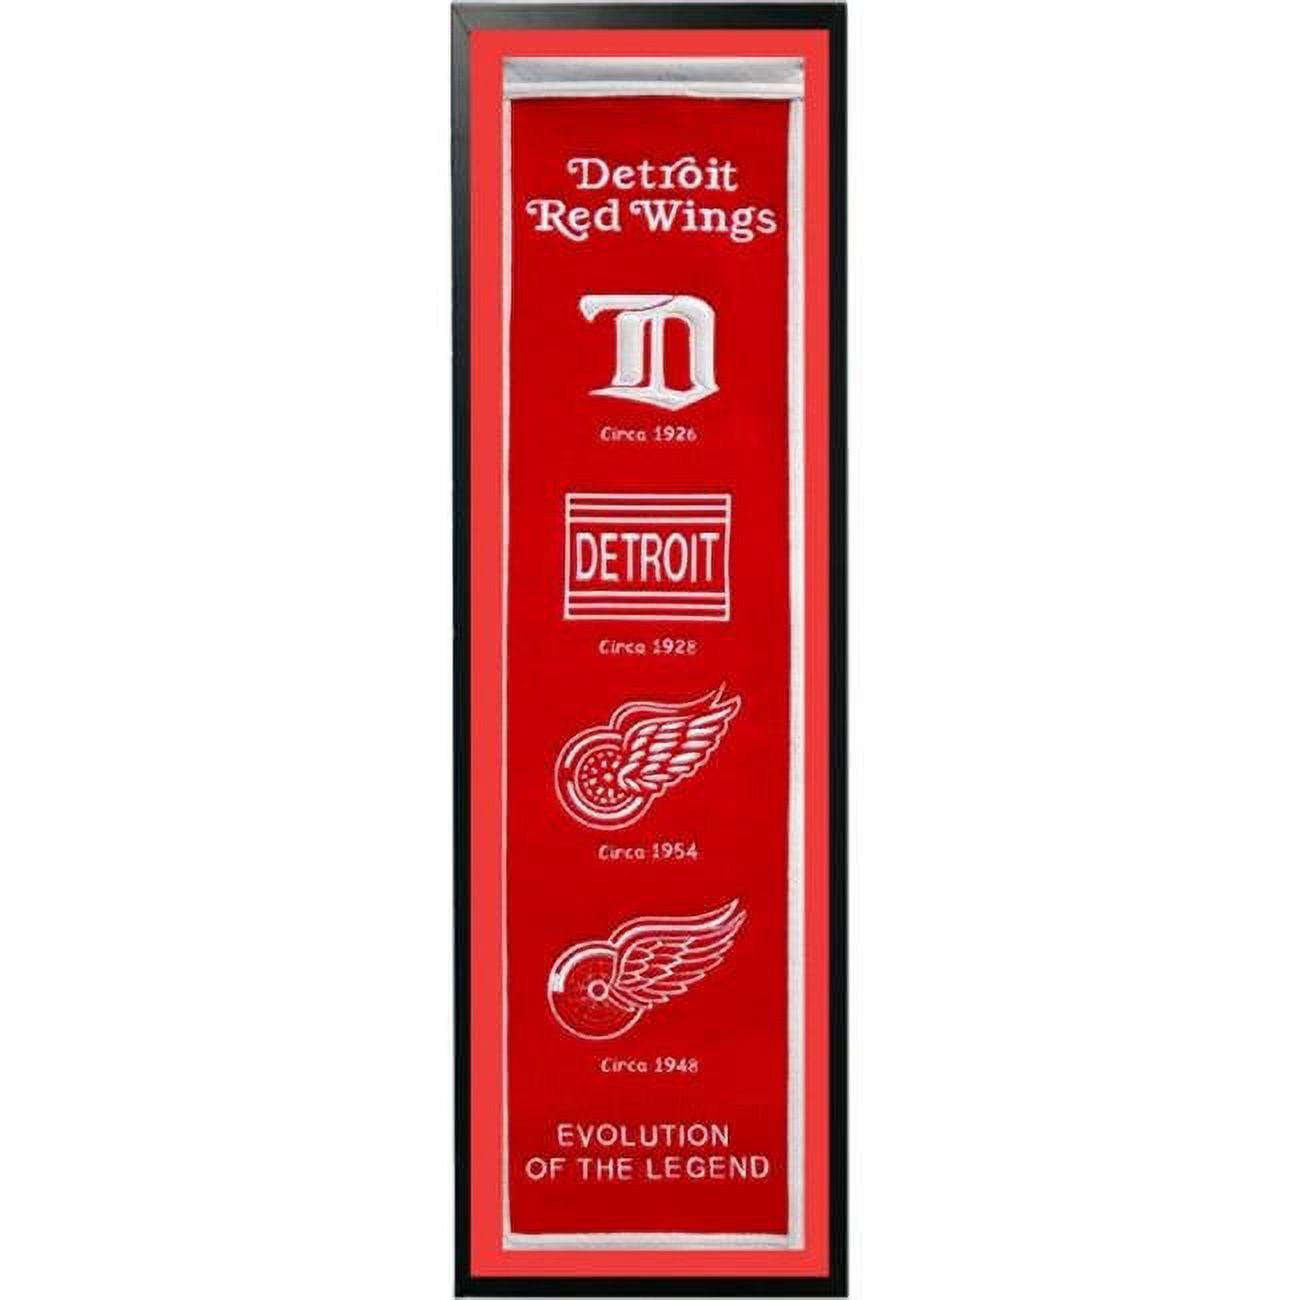 Detroit Red Wings Home & Office Goods, Red Wings Home Goods, Flags